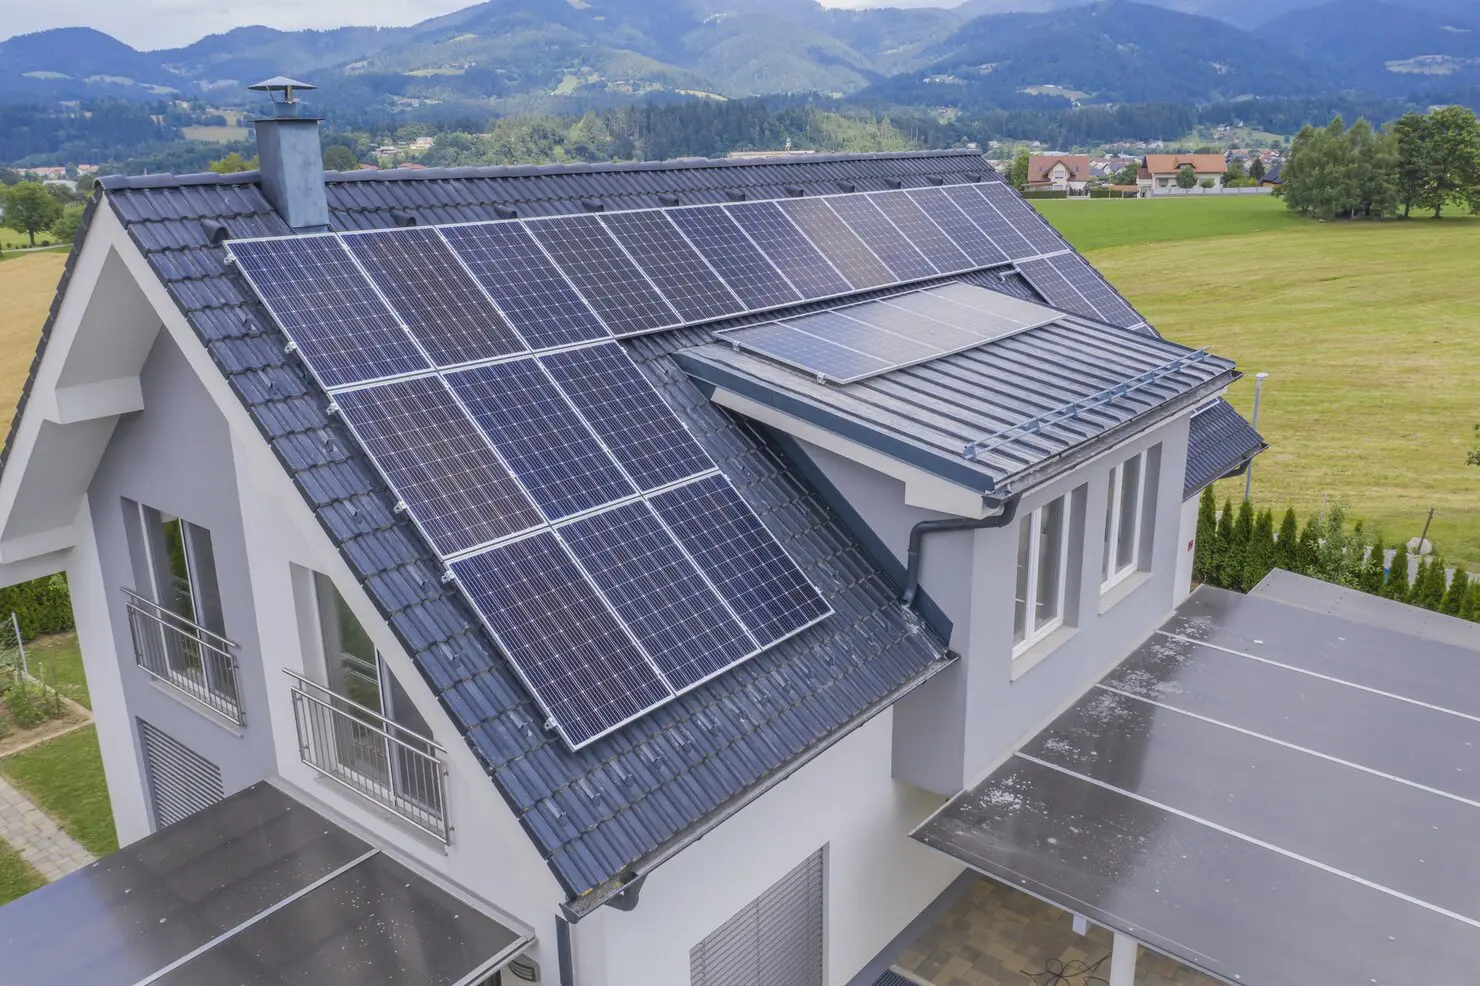 aerial-view-private-house-with-solar-panels-roof_181624-14677